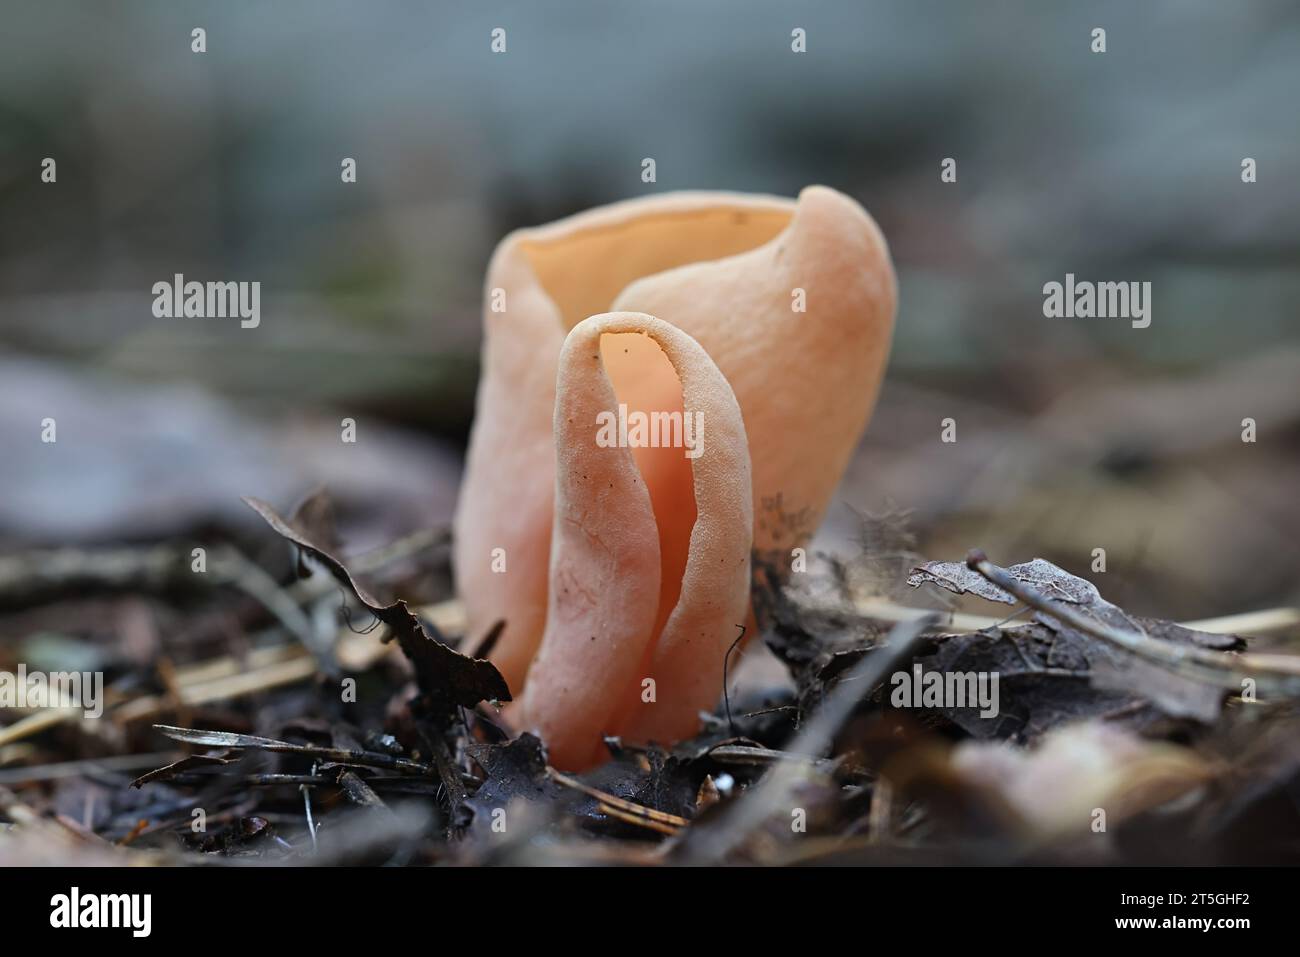 Otidea onotica, commonly known as hare's ear, wild fungus from Finland Stock Photo